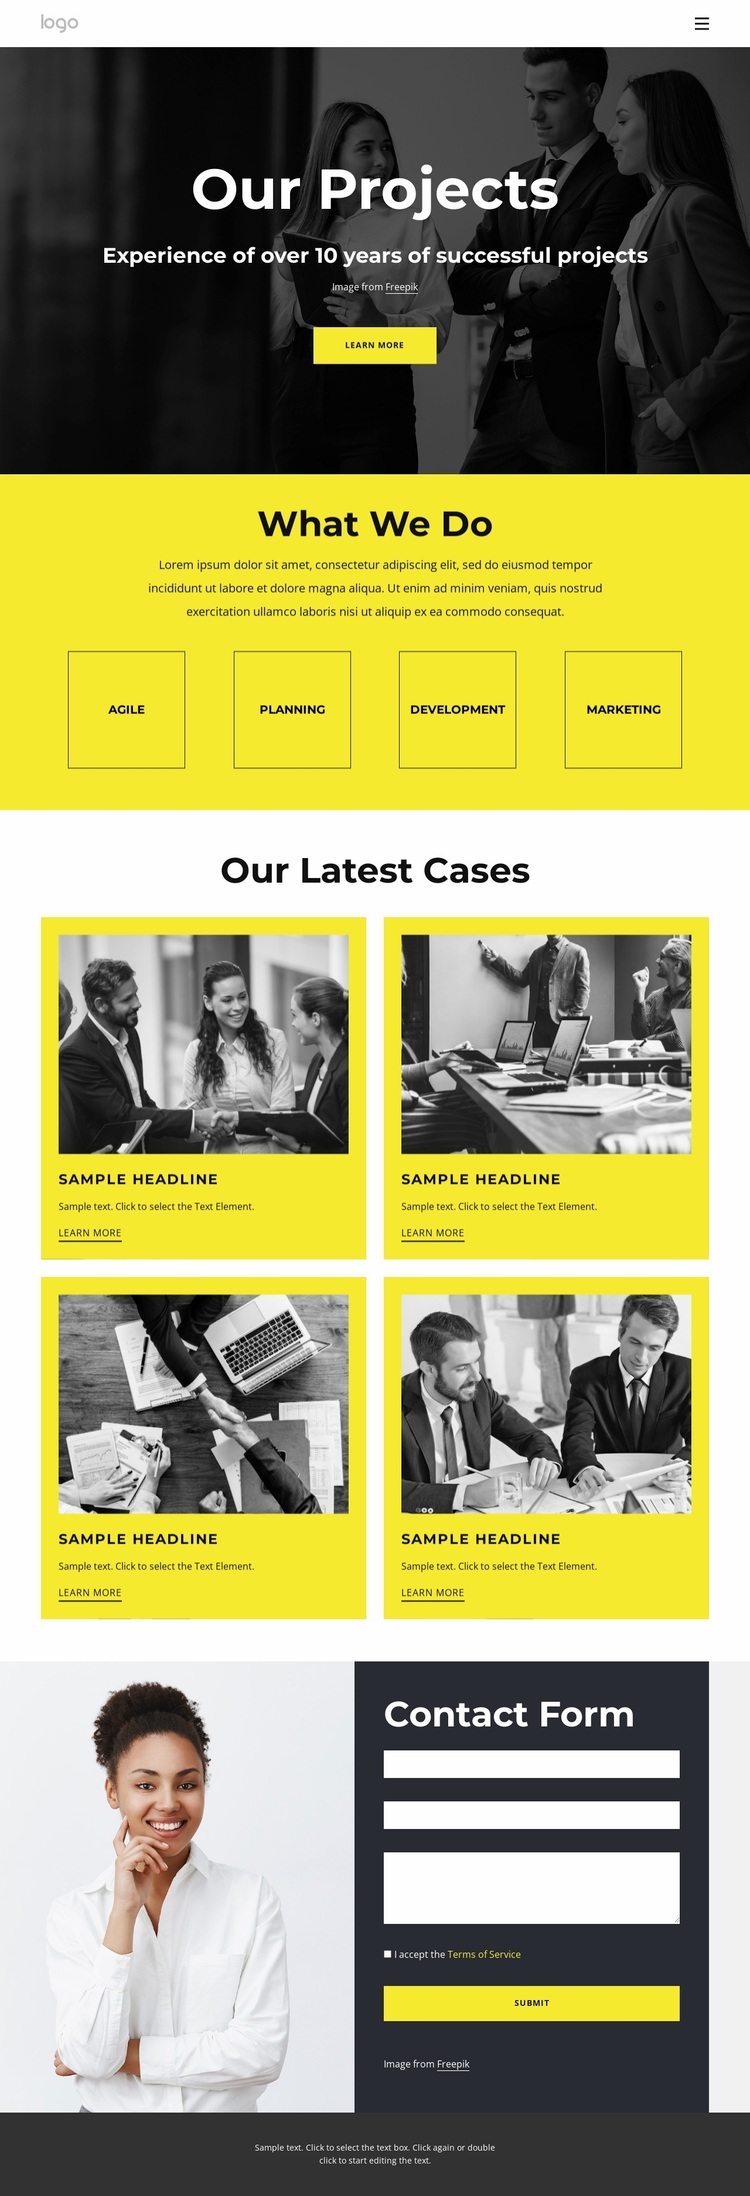 Our consulting success stories Website Design